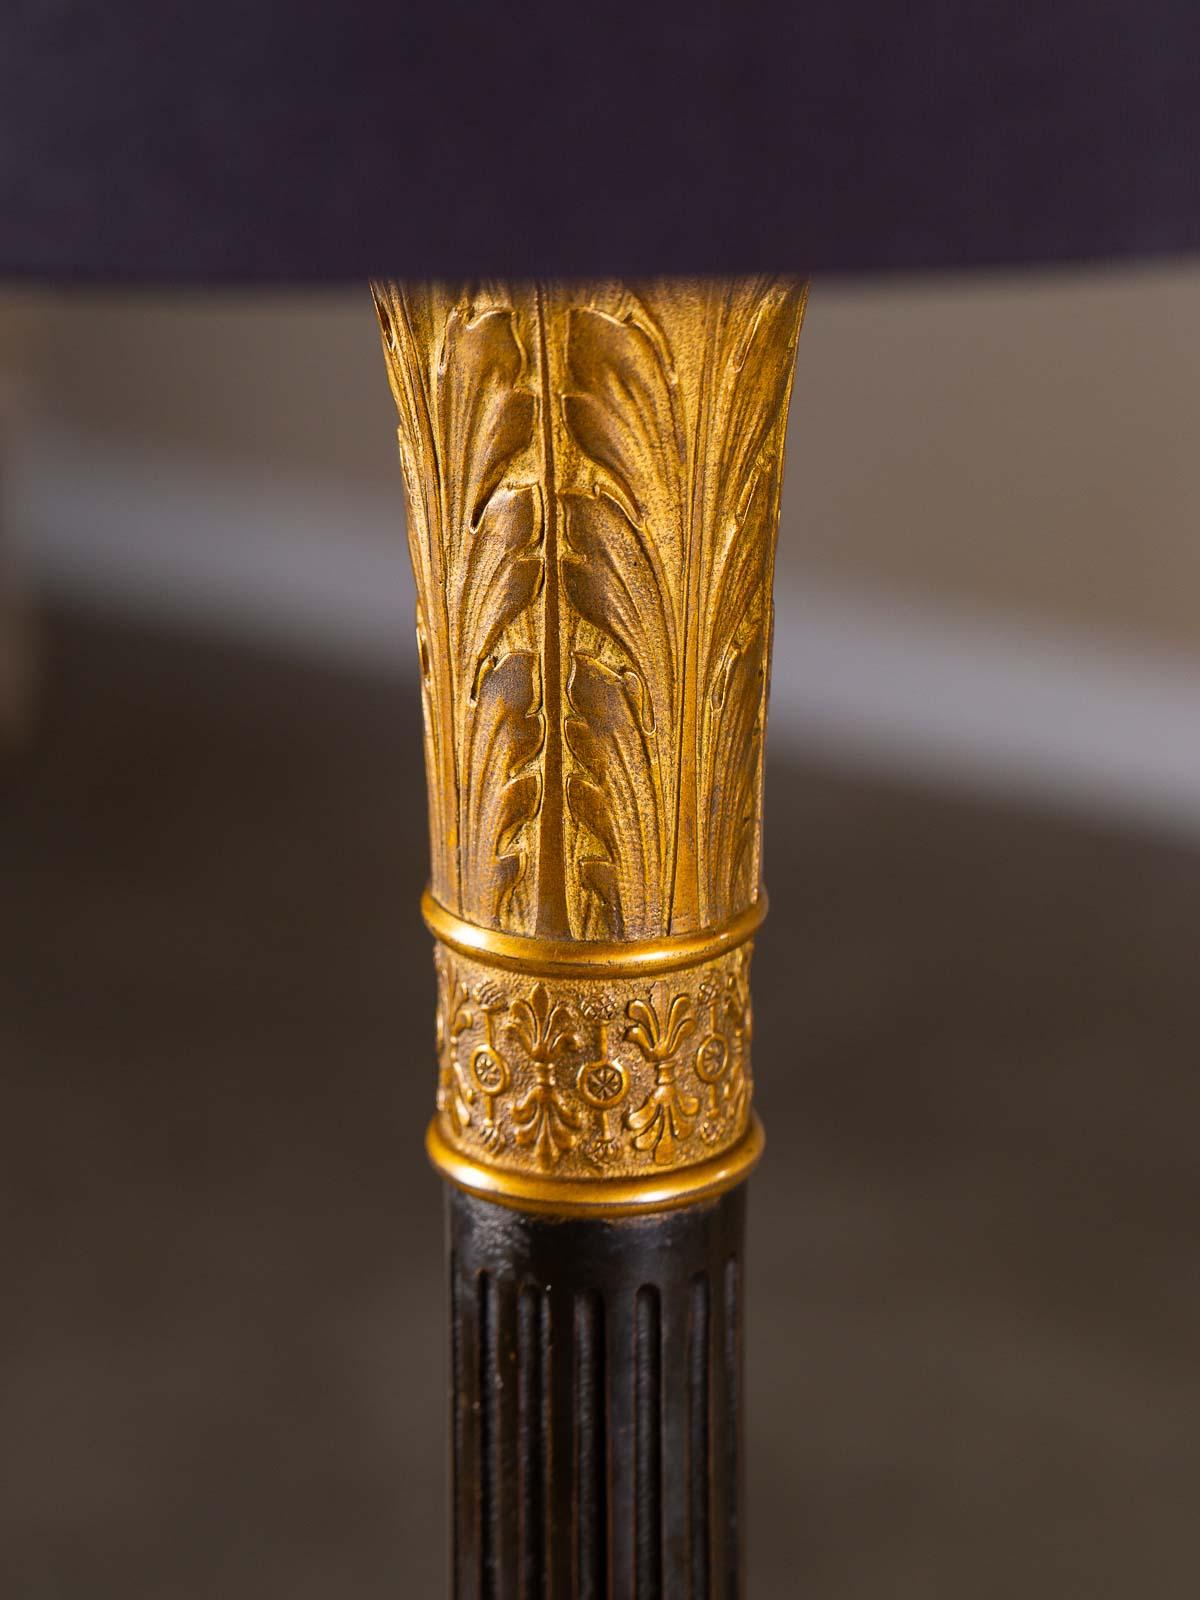 2 Vintage French Neoclassical Bronze Gilt Bronze Column Floor Lamps, circa 1910 In Good Condition For Sale In Houston, TX